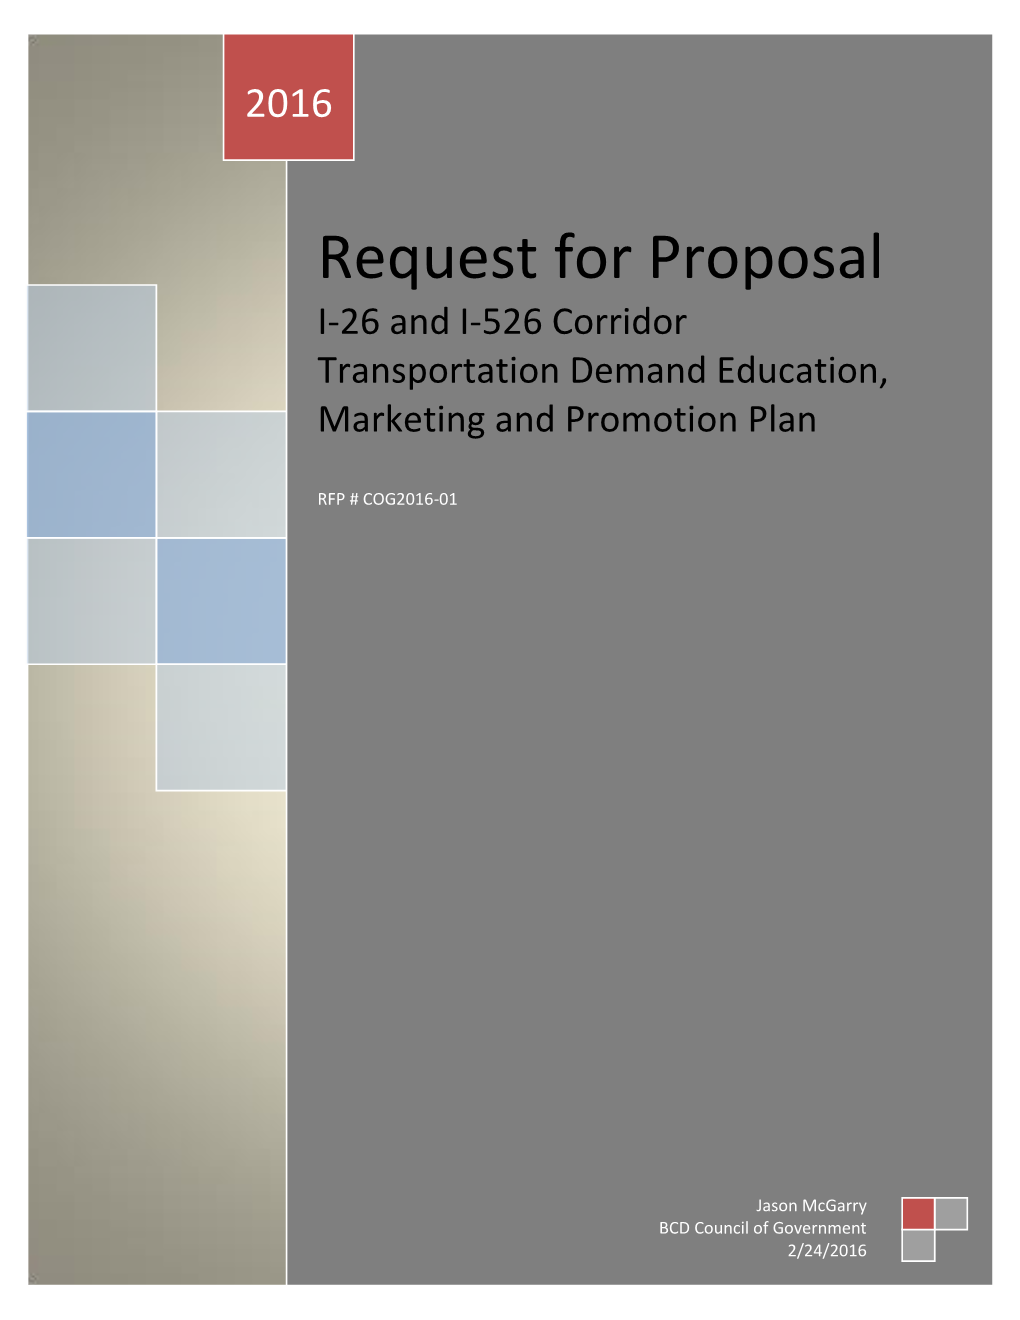 Request for Proposal I-26 and I-526 Corridor Transportation Demand Education, Marketing and Promotion Plan